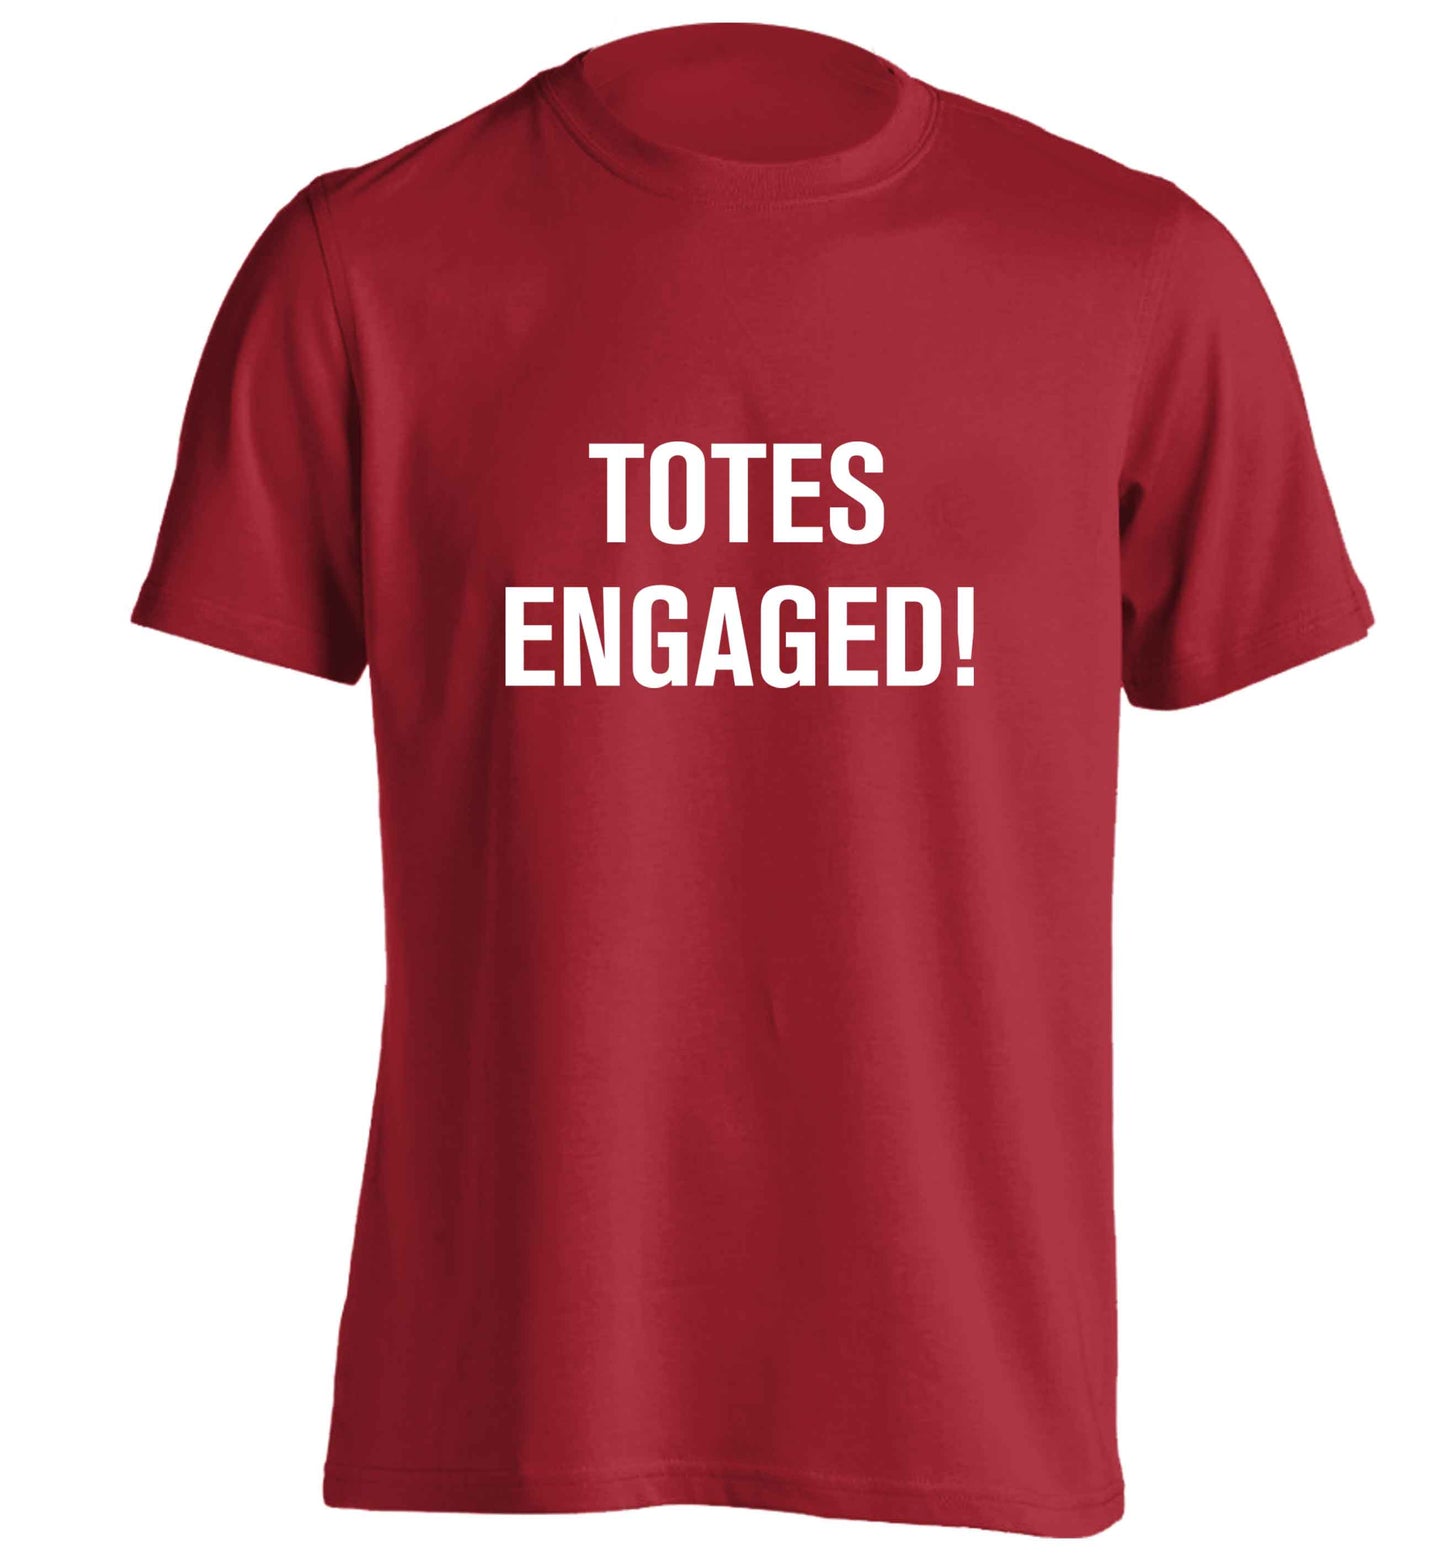 Totes engaged adults unisex red Tshirt 2XL